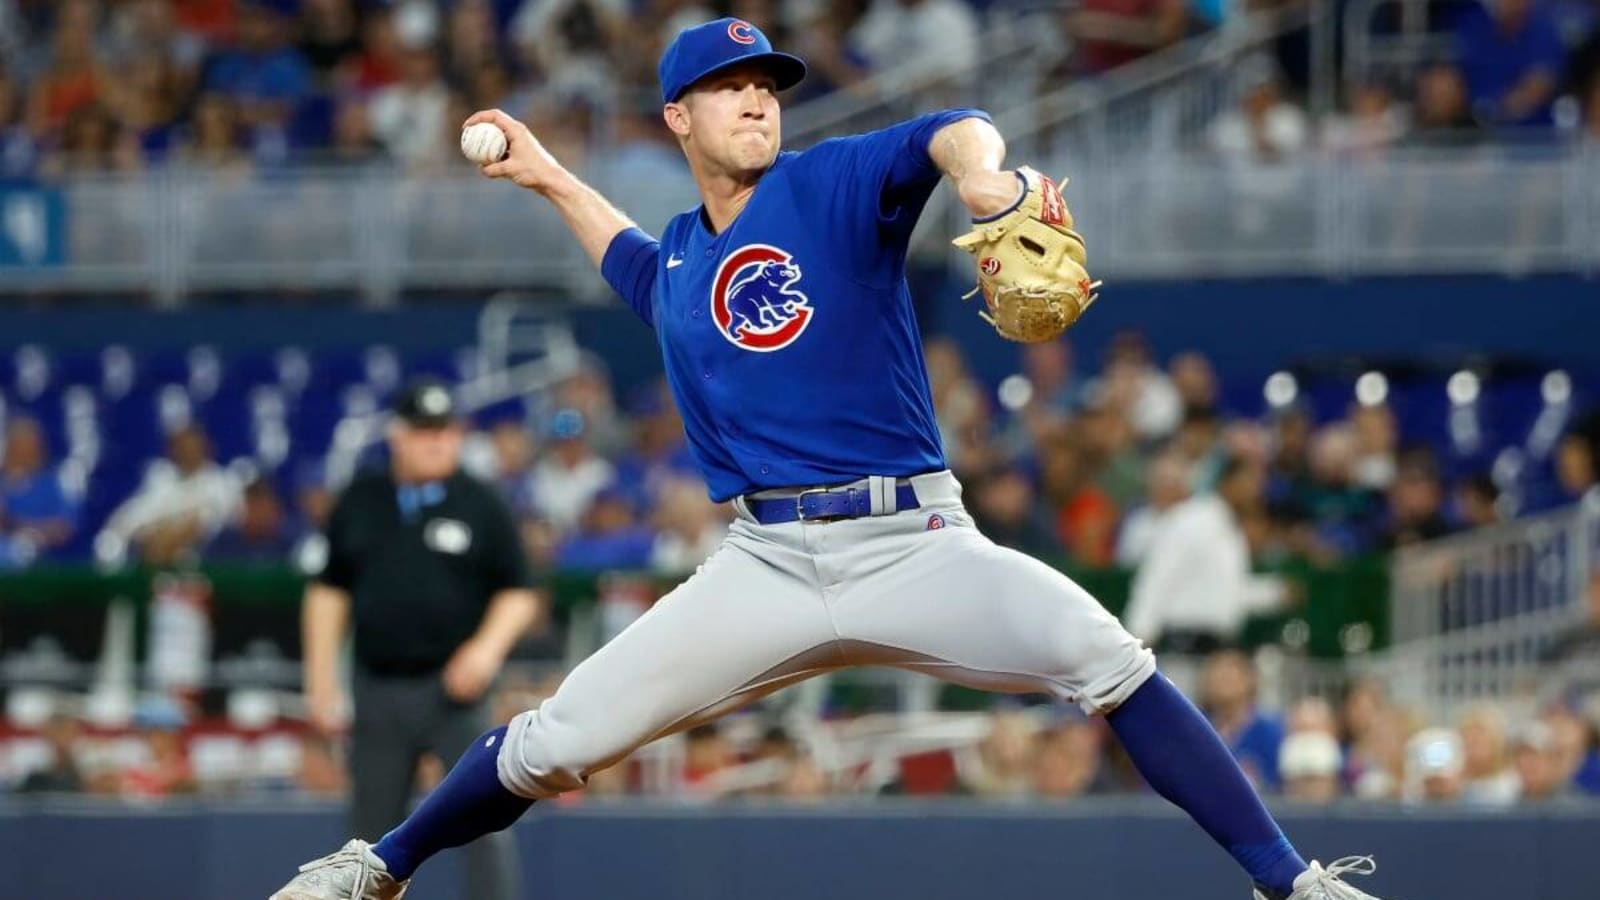 Cubs Prospect Has Rough Start In Miami